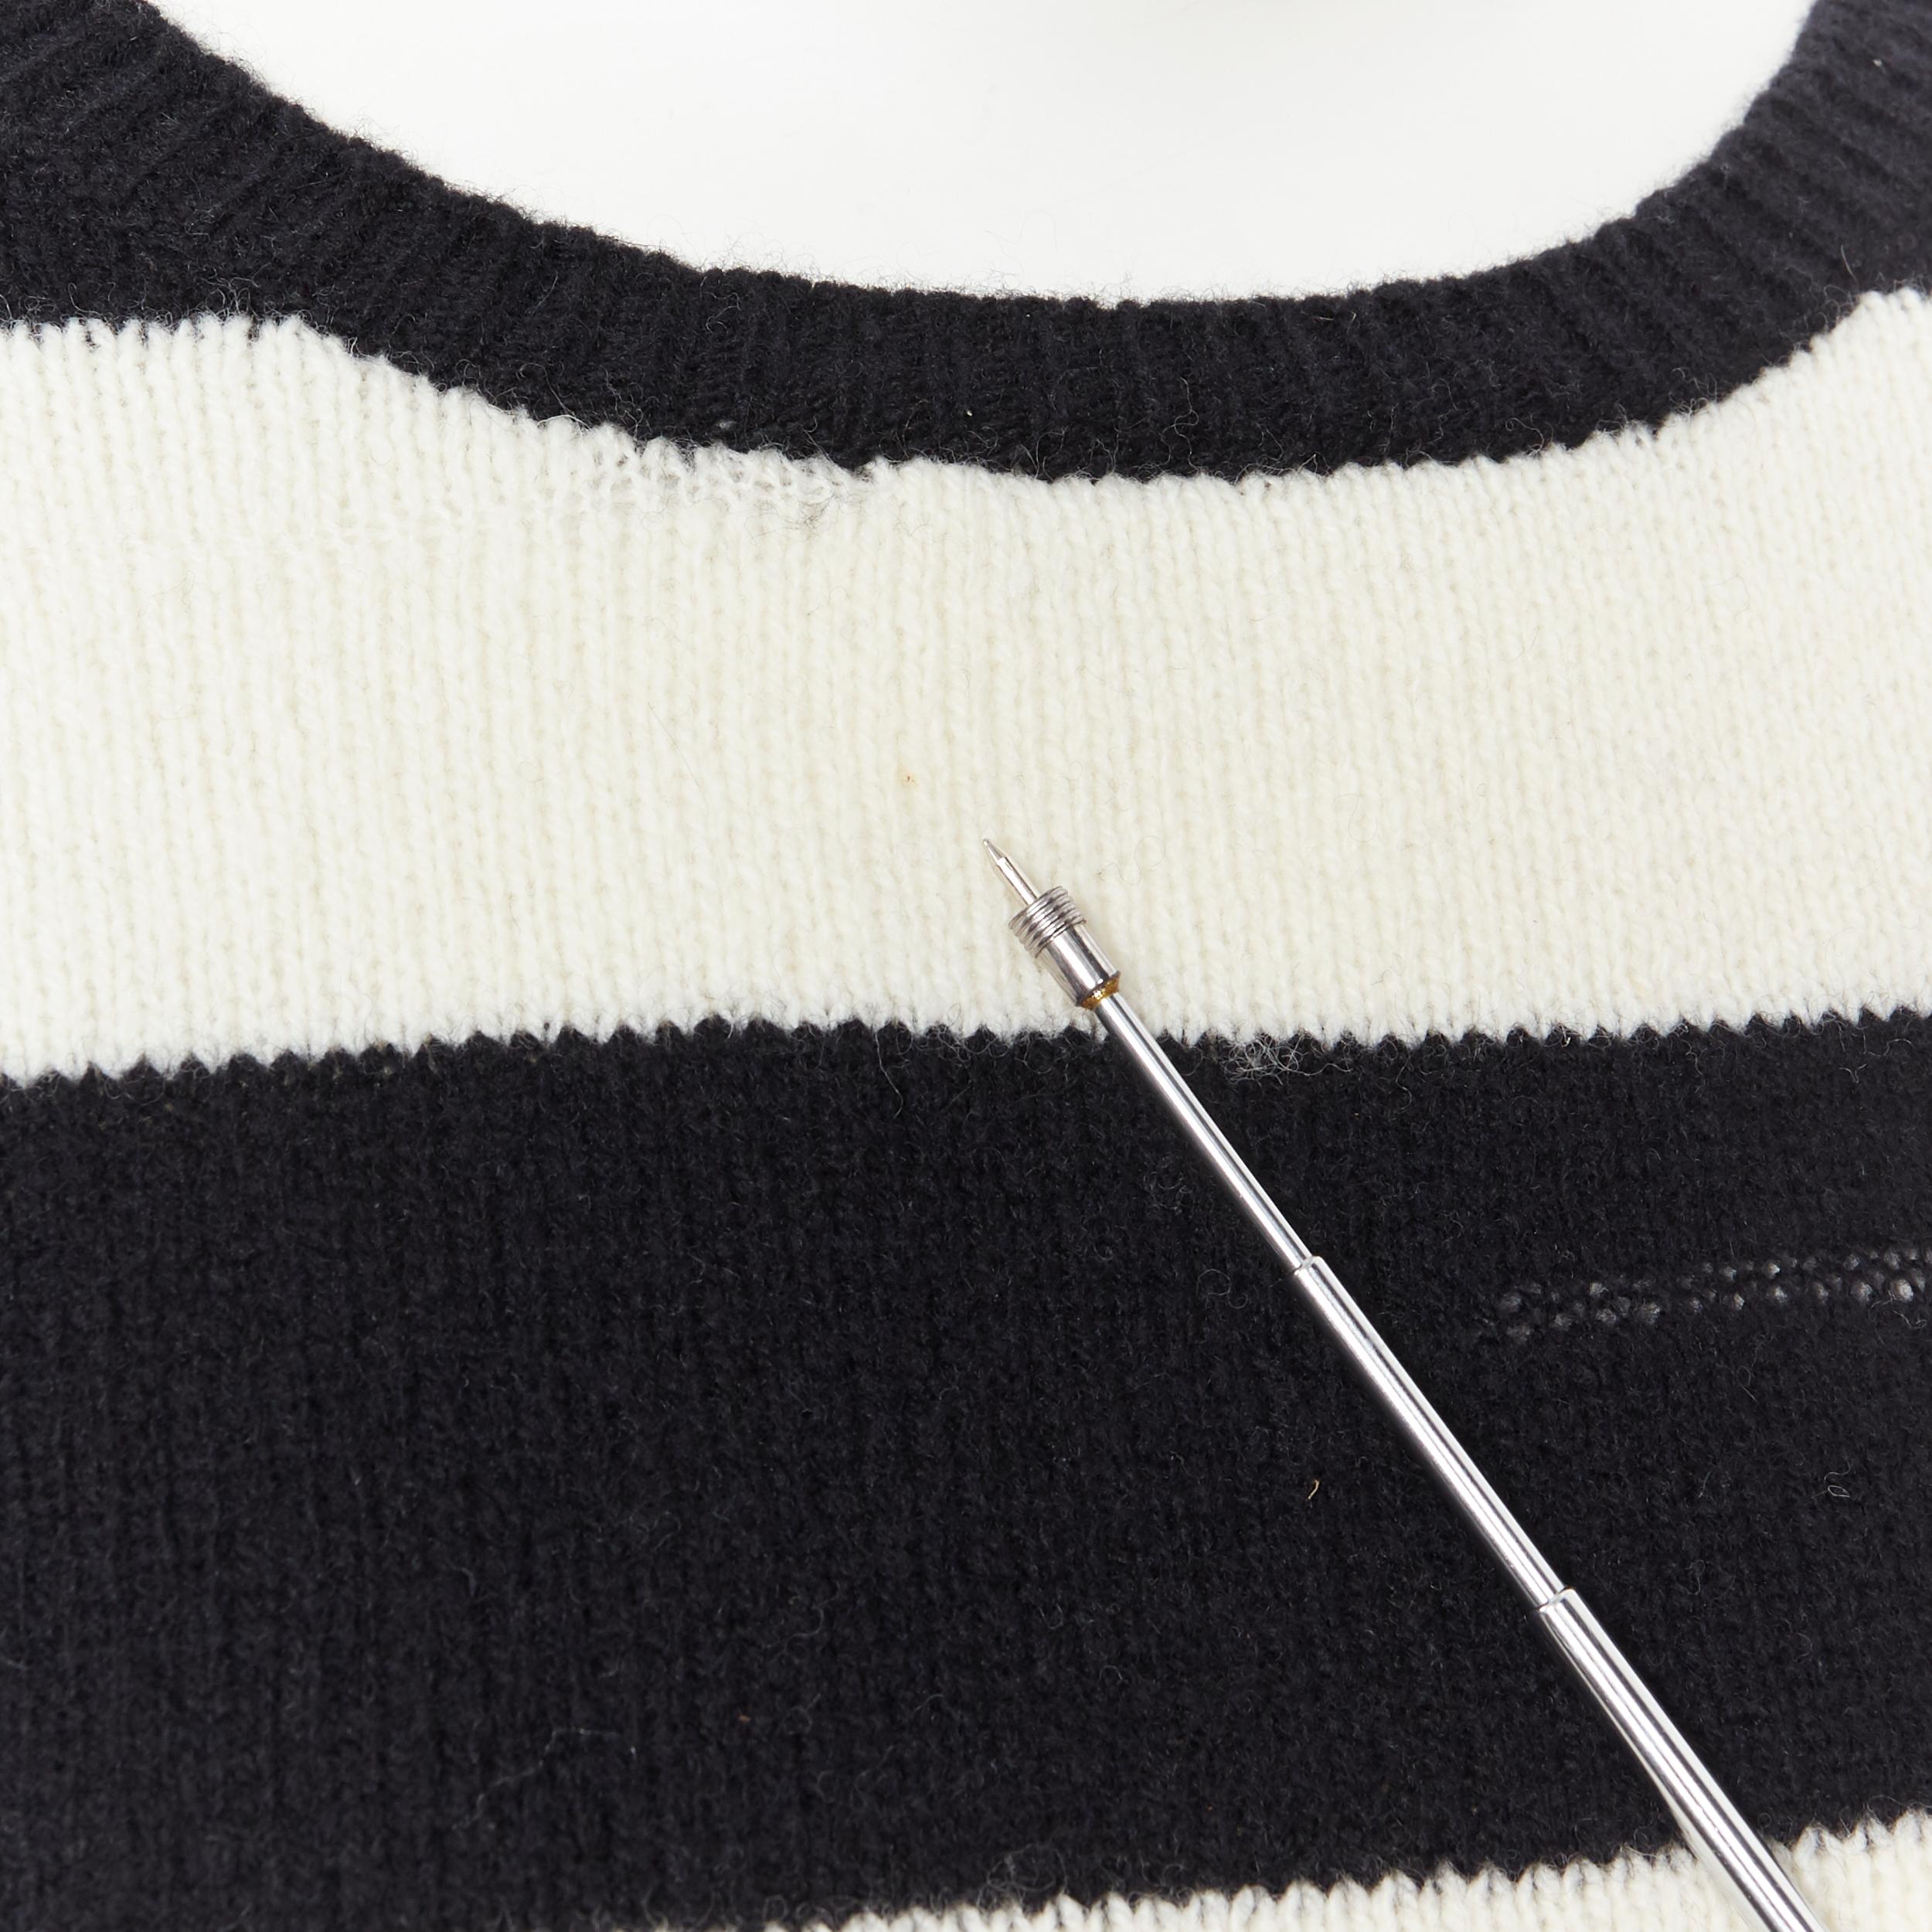 SAINT LAURENT 2015 black white striped distressed holey knit sweater top XS 4